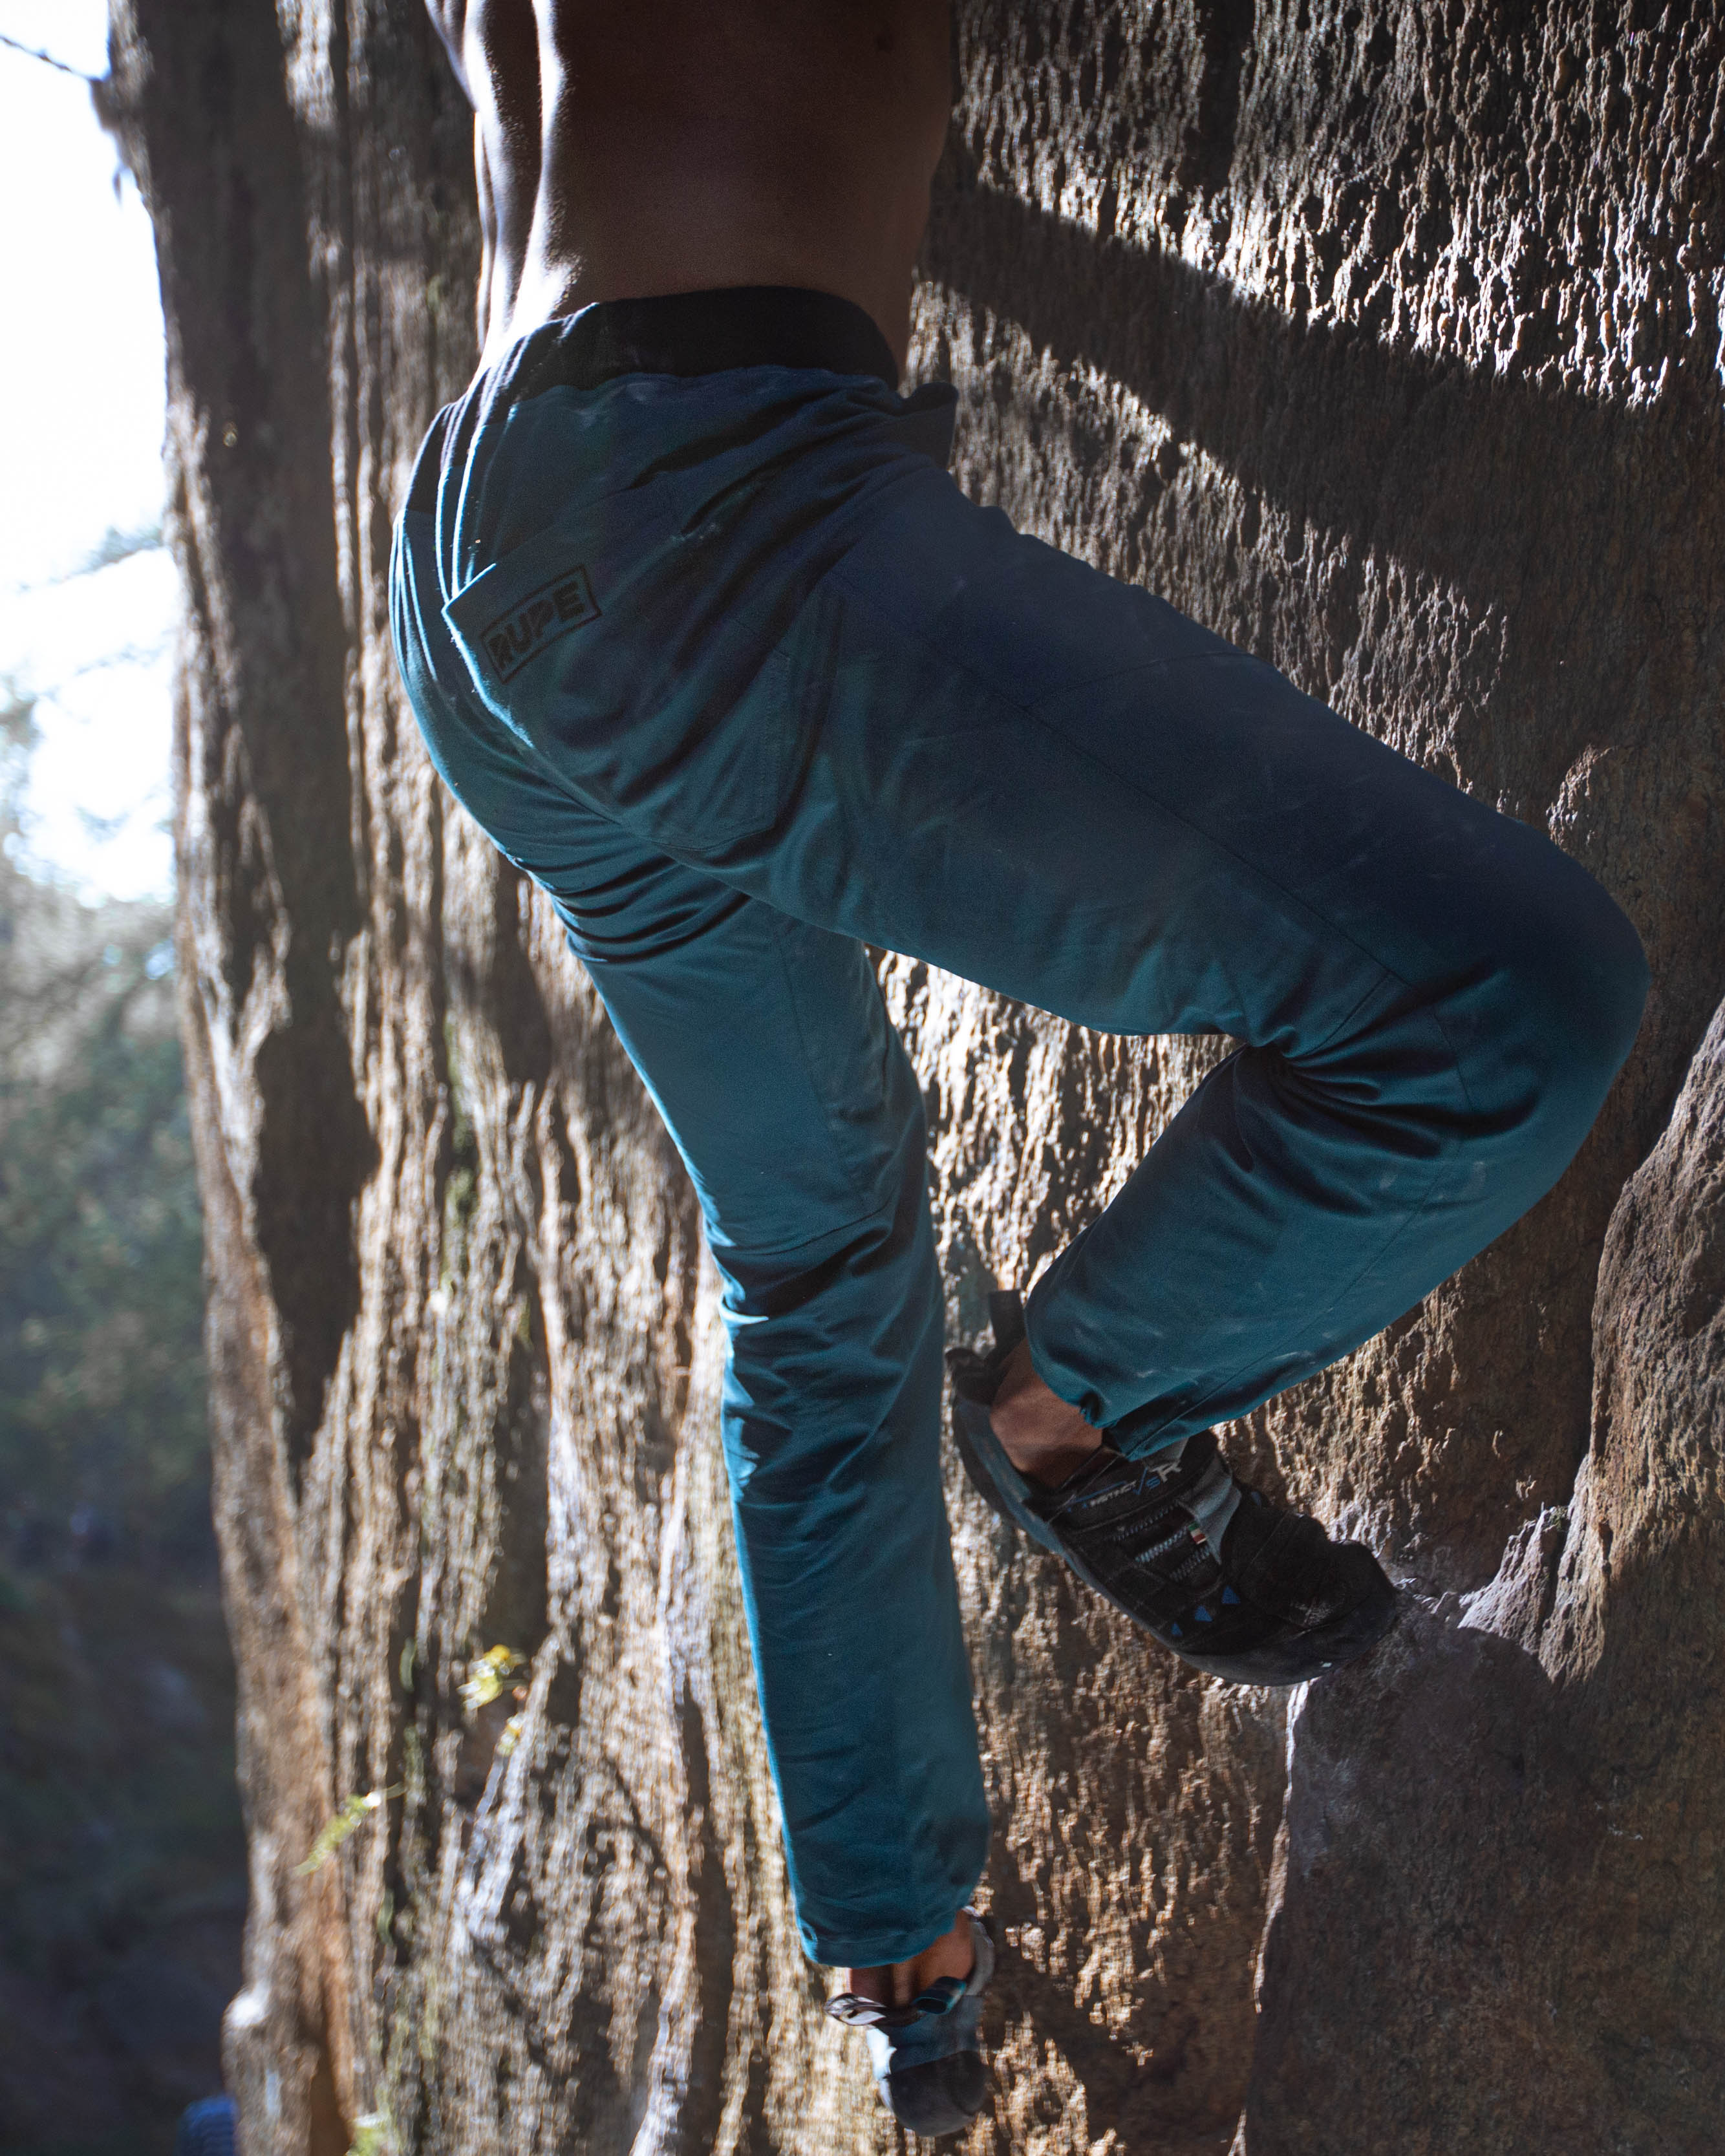 Limited Edition - PIRENEI climbing trousers - Handmade men's teal